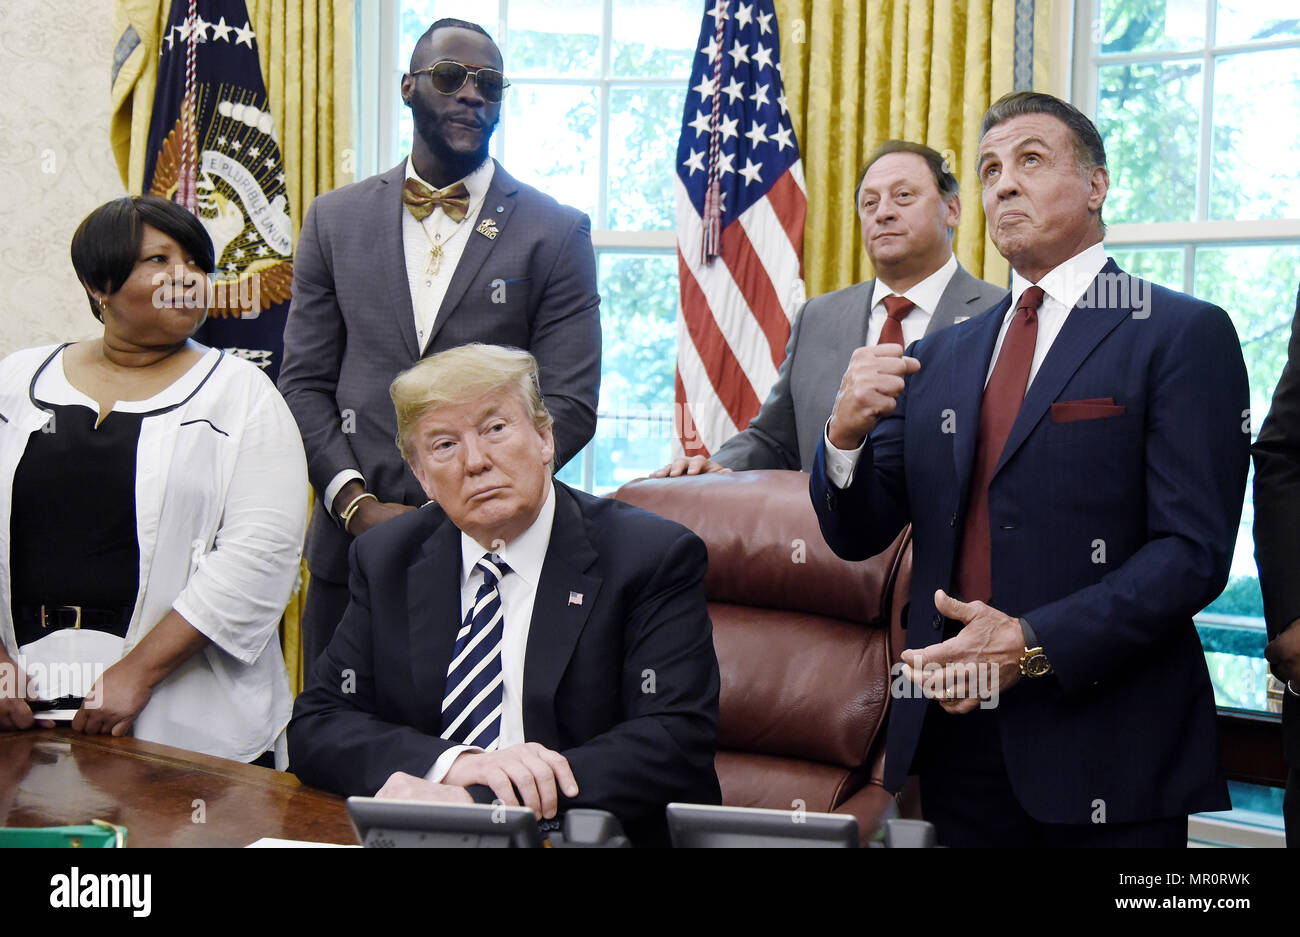 United States President Donald J. Trump listens as actor Sylvester Stallone gestures during a signing ceremony to grant posthumous pardon to former heavyweight champion Jack Johnson in the Oval Office of the White House on May 24, 2018 in Washington, DC. Credit: Olivier Douliery/Pool via CNP /MediaPunch Stock Photo